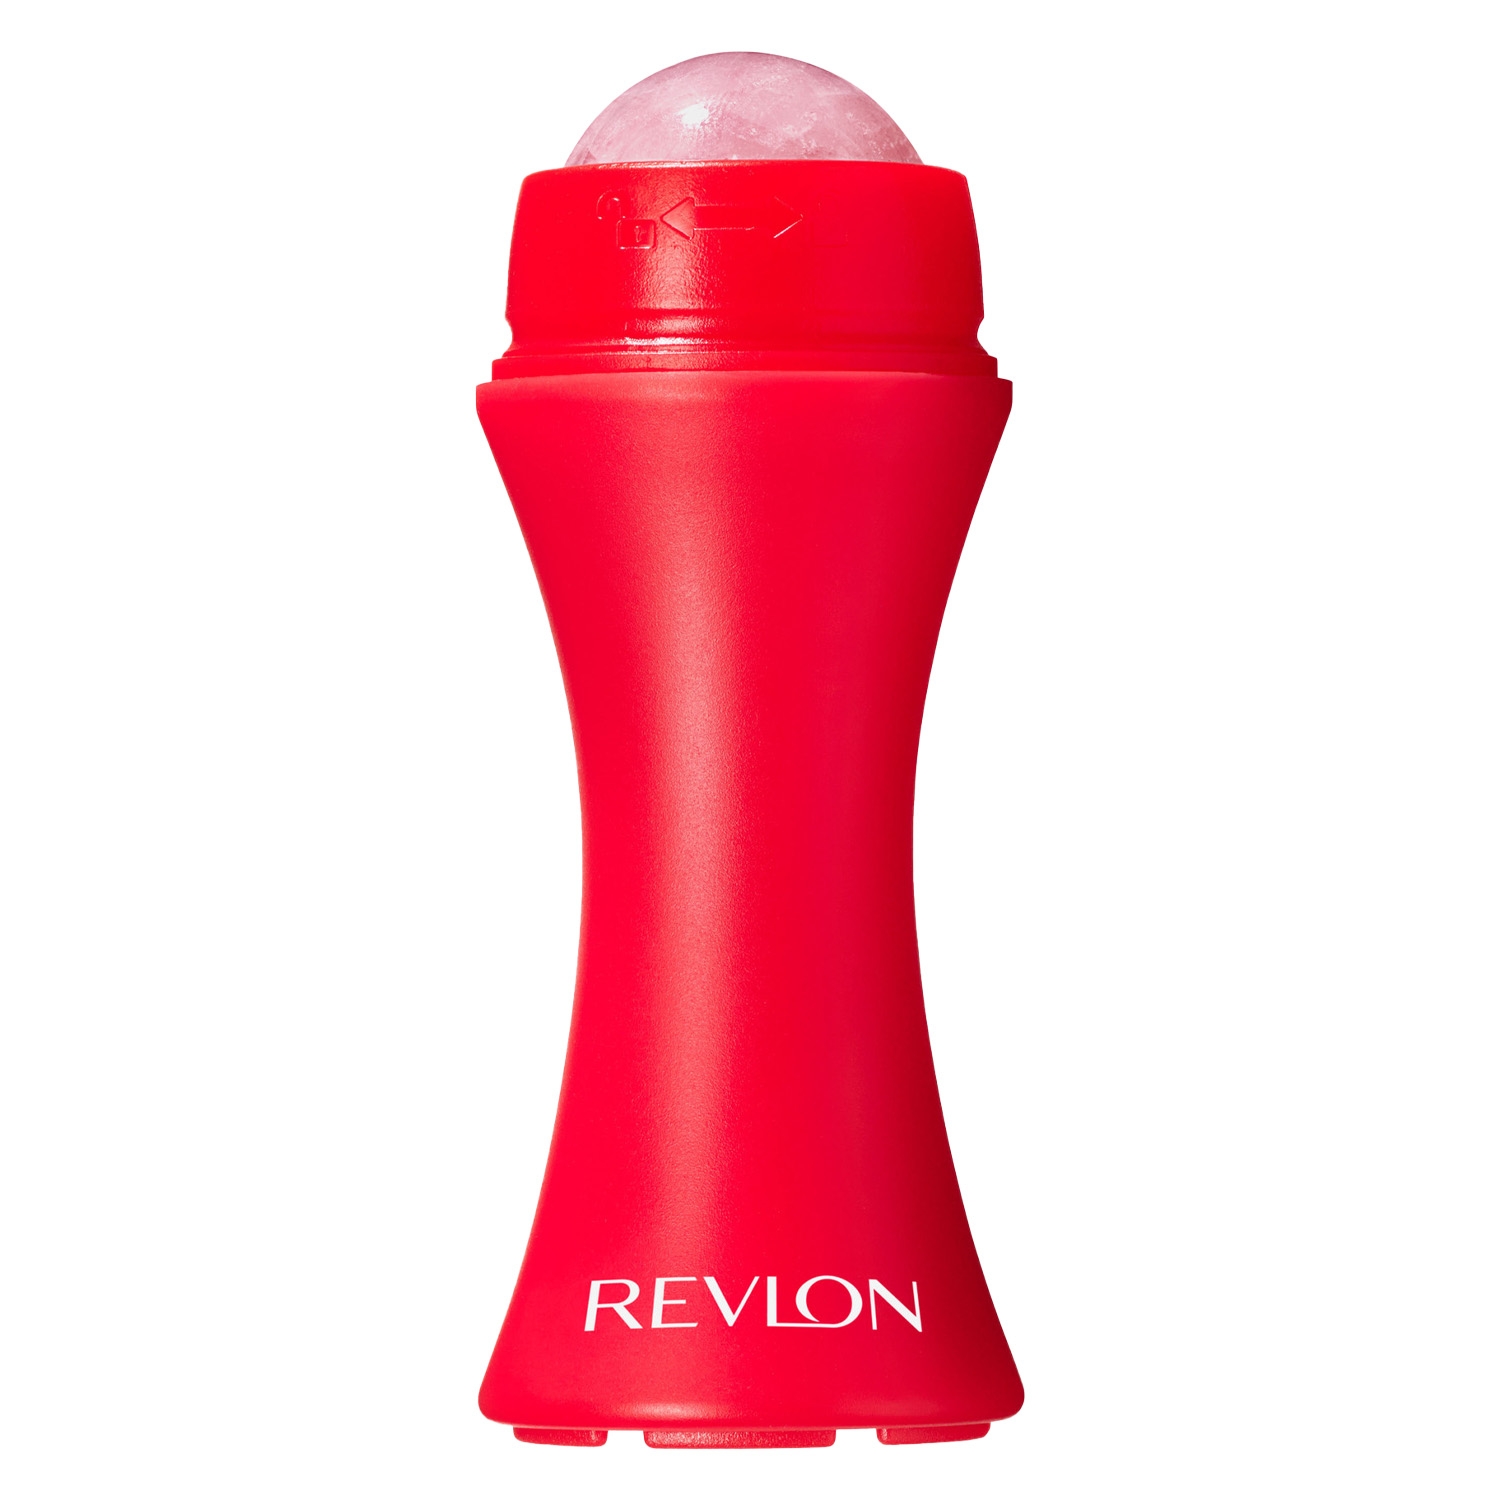 Product image from Revlon Tools - Skin Reviving Roller